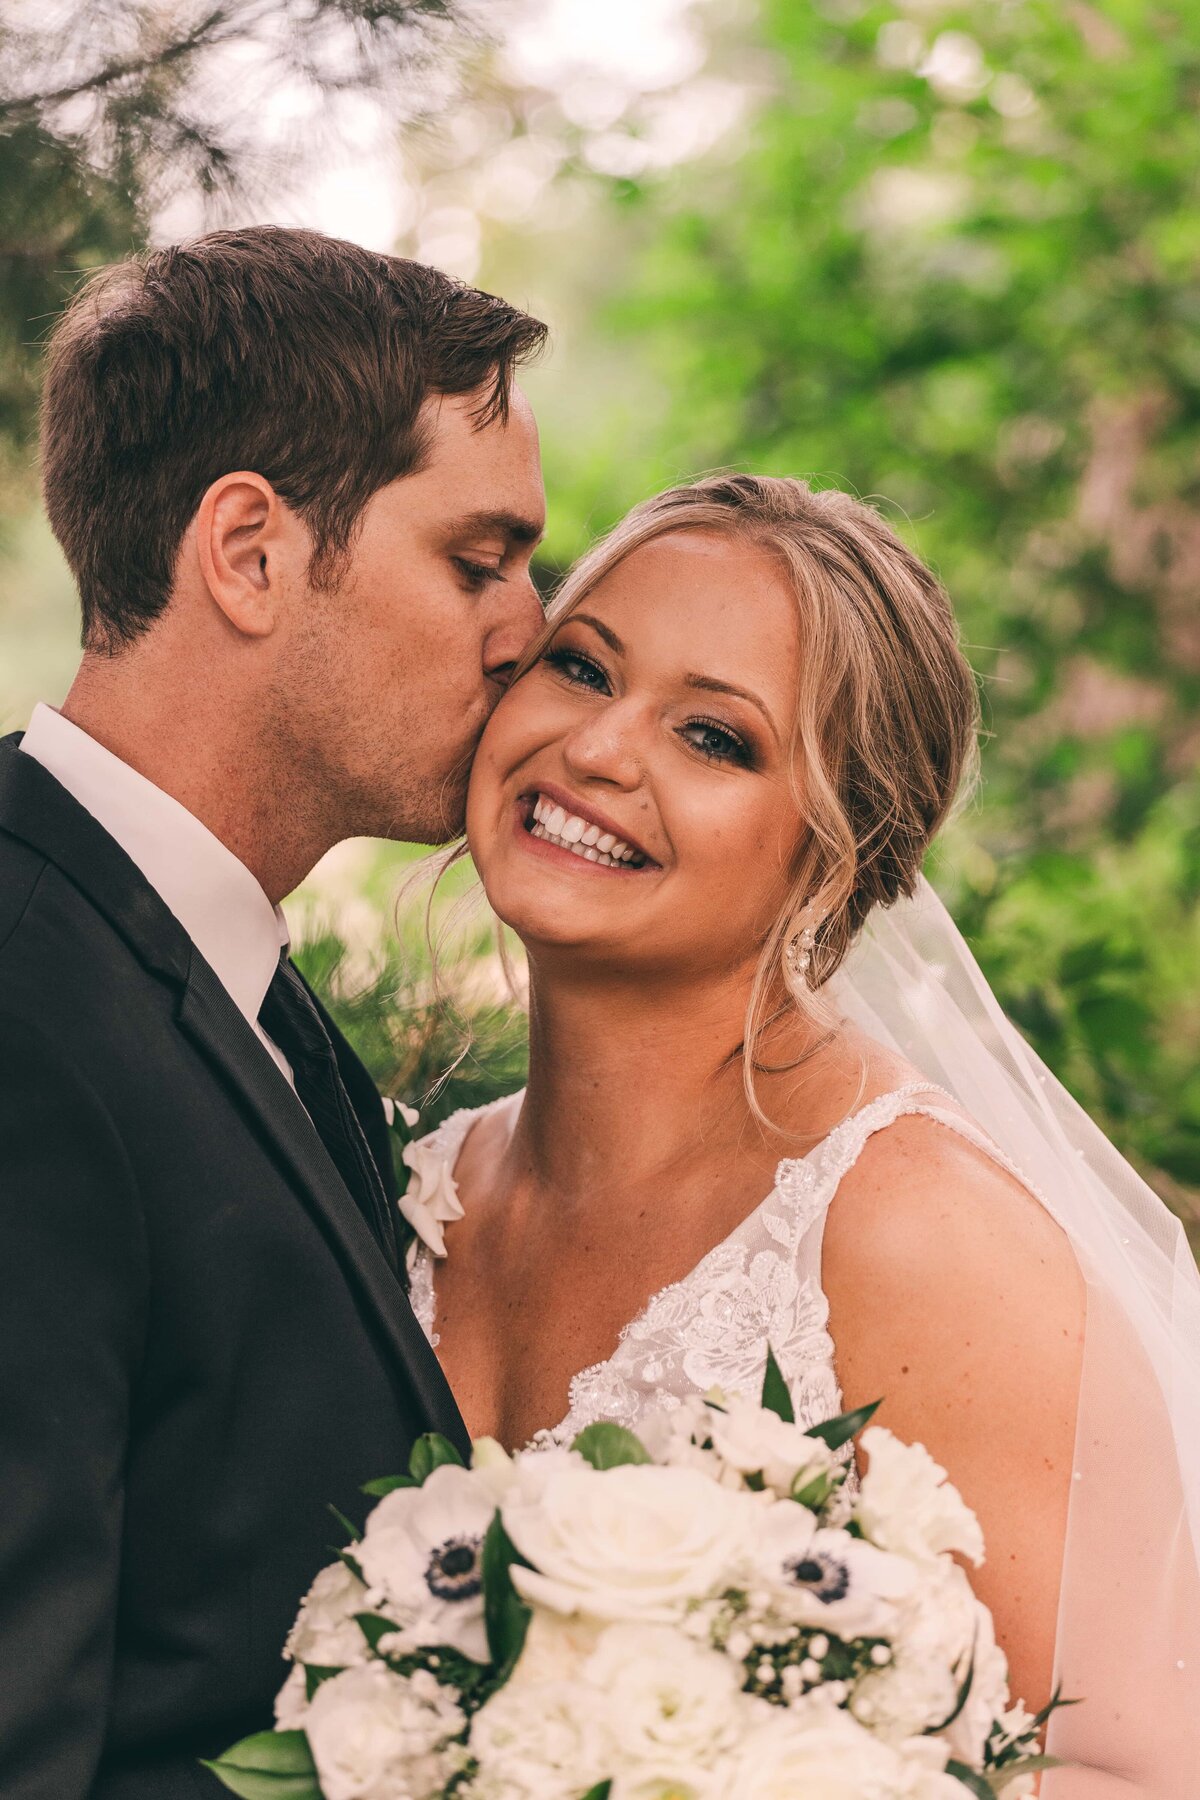 Groom kissing bride on the cheek as she smiles, both dressed in wedding attire, holding a bouquet, with an Iowa greenery background.